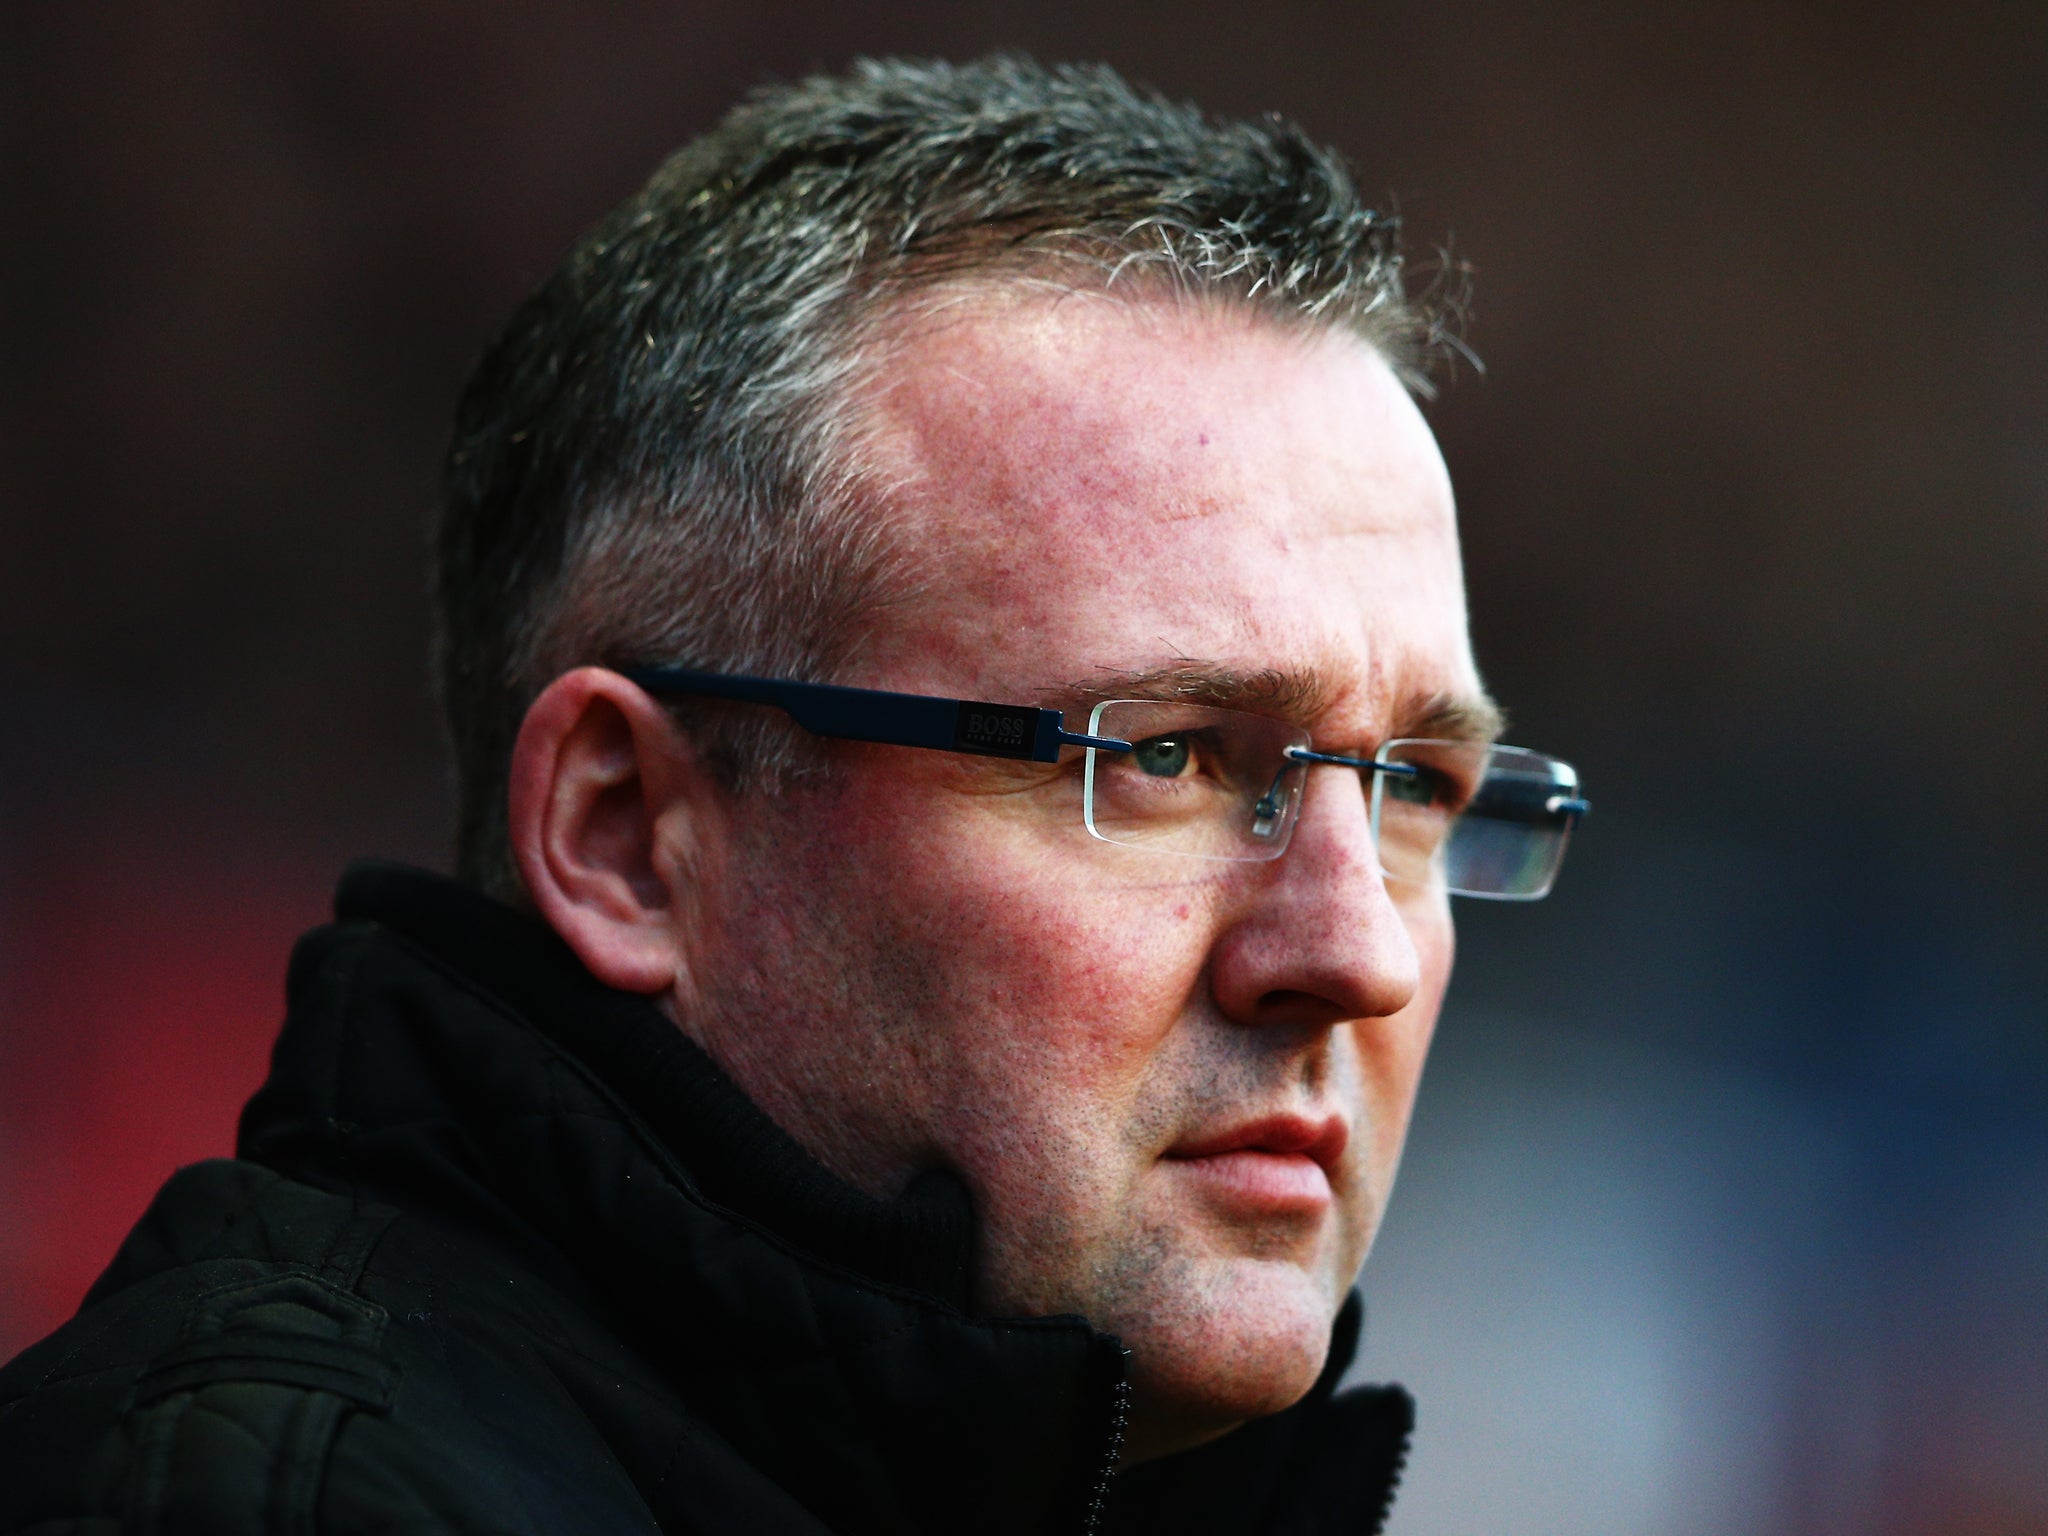 Paul Lambert says he still has confidence in his players despite a fourth straight defeat which saw them get booed off after the 1-0 defeat to Crystal Palace